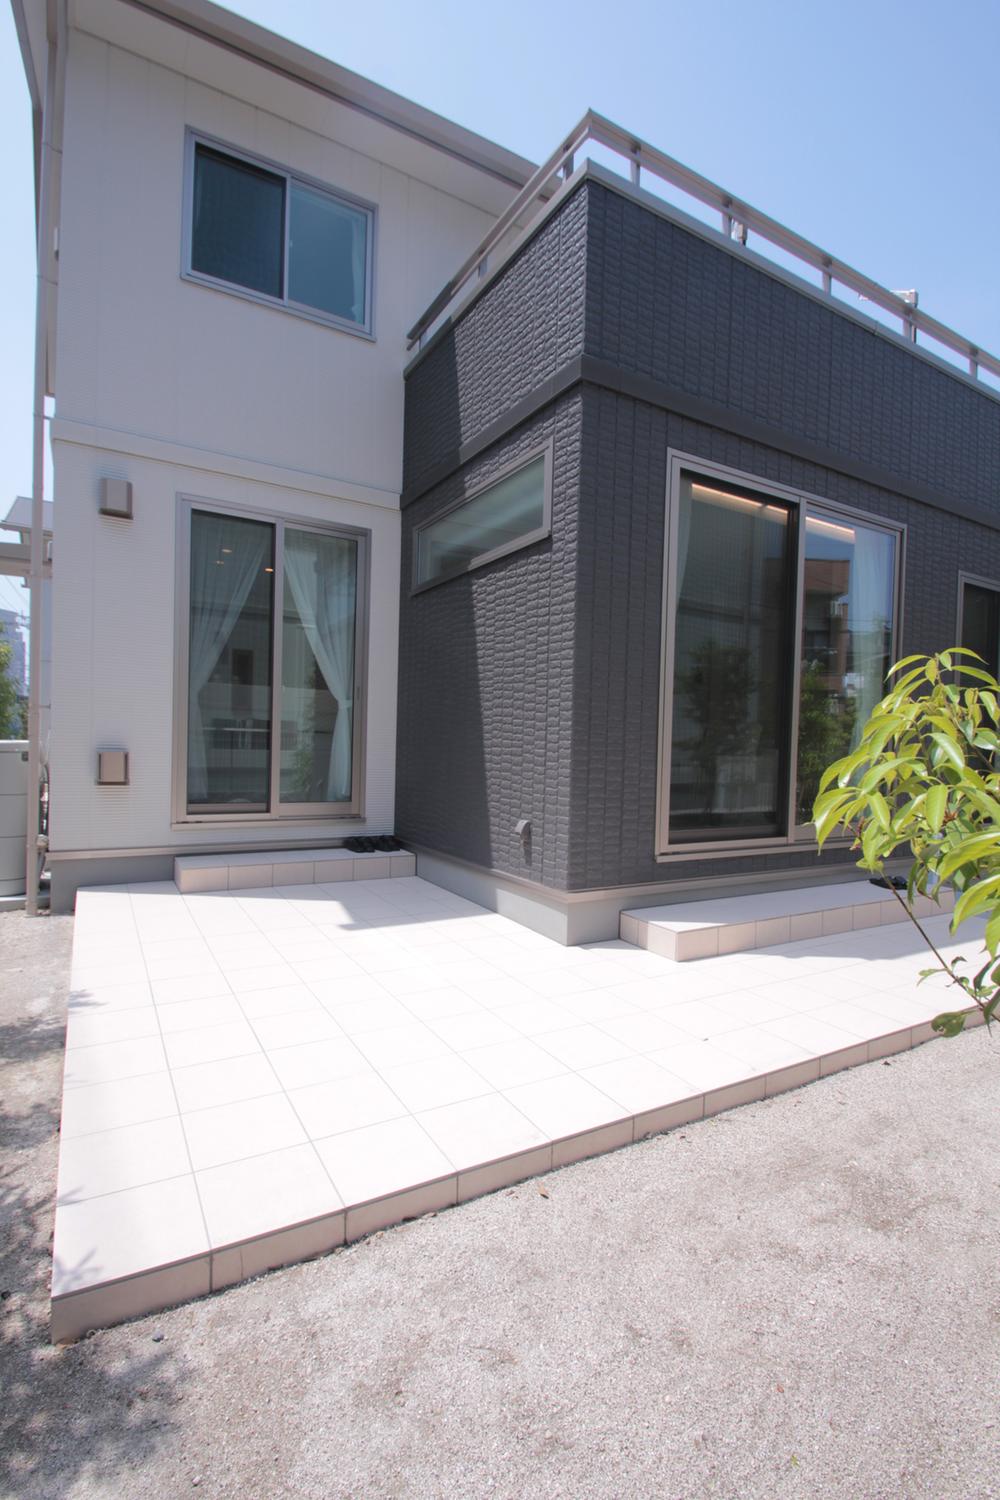 Local appearance photo. It has established a tile terrace of disseminated to No. 16 destinations appearance (May 2013) shooting garden. Holiday, guests can enjoy brunch and barbecue in the garden.